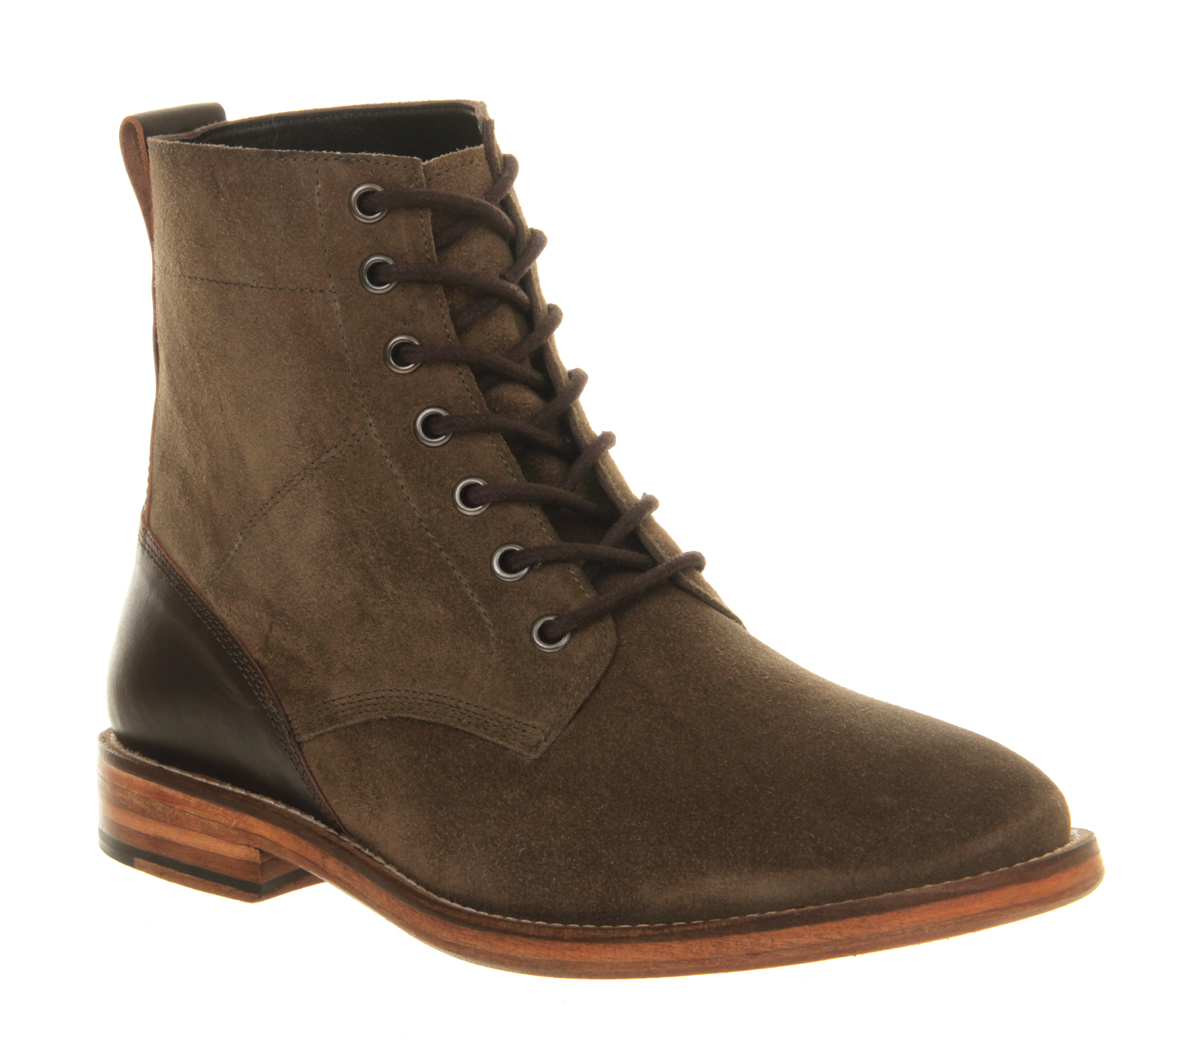 Ask the MissusJack bootsOlive Suede Chocolate Leather